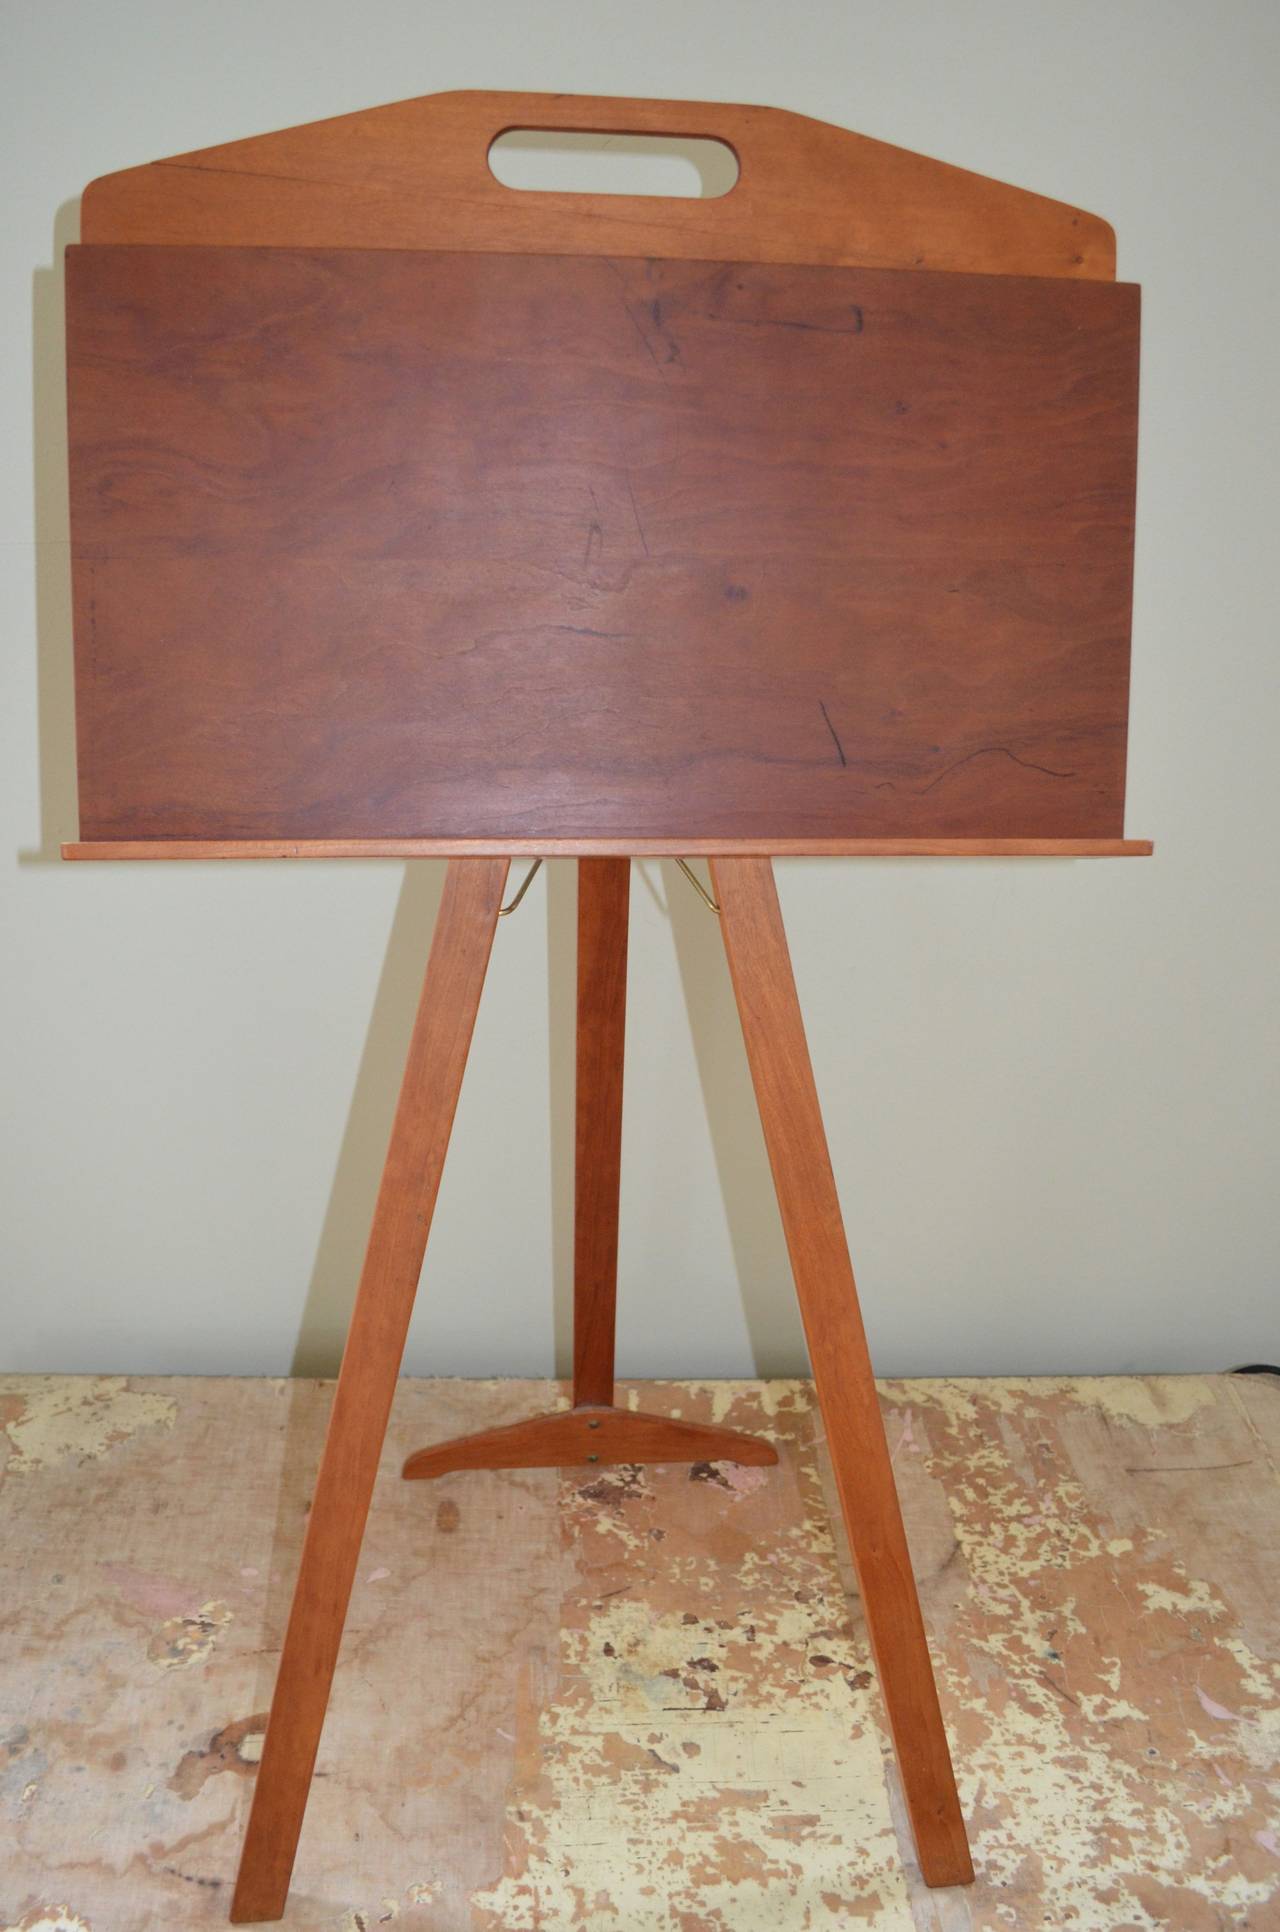 Mid-century display easel on a collapsible stand with storage compartment. Simplicity personified constructed in what appears to be cherrywood. The back leg of the stand hinges out and locks in place for display purposes. Folds in for slim-lined